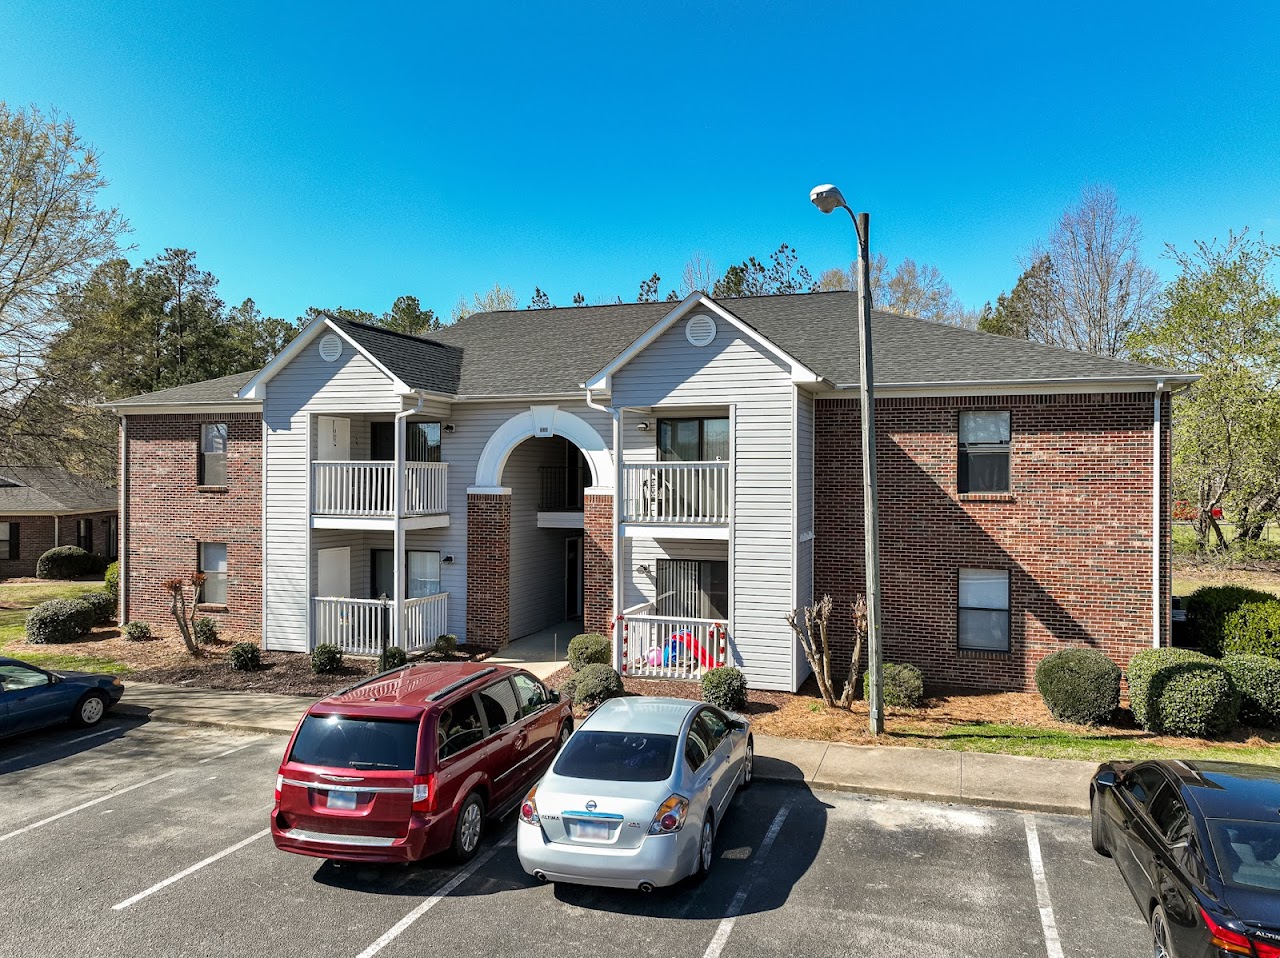 Photo of MCKENZIE PARK. Affordable housing located at HARKEY ROAD SANFORD, NC 27330